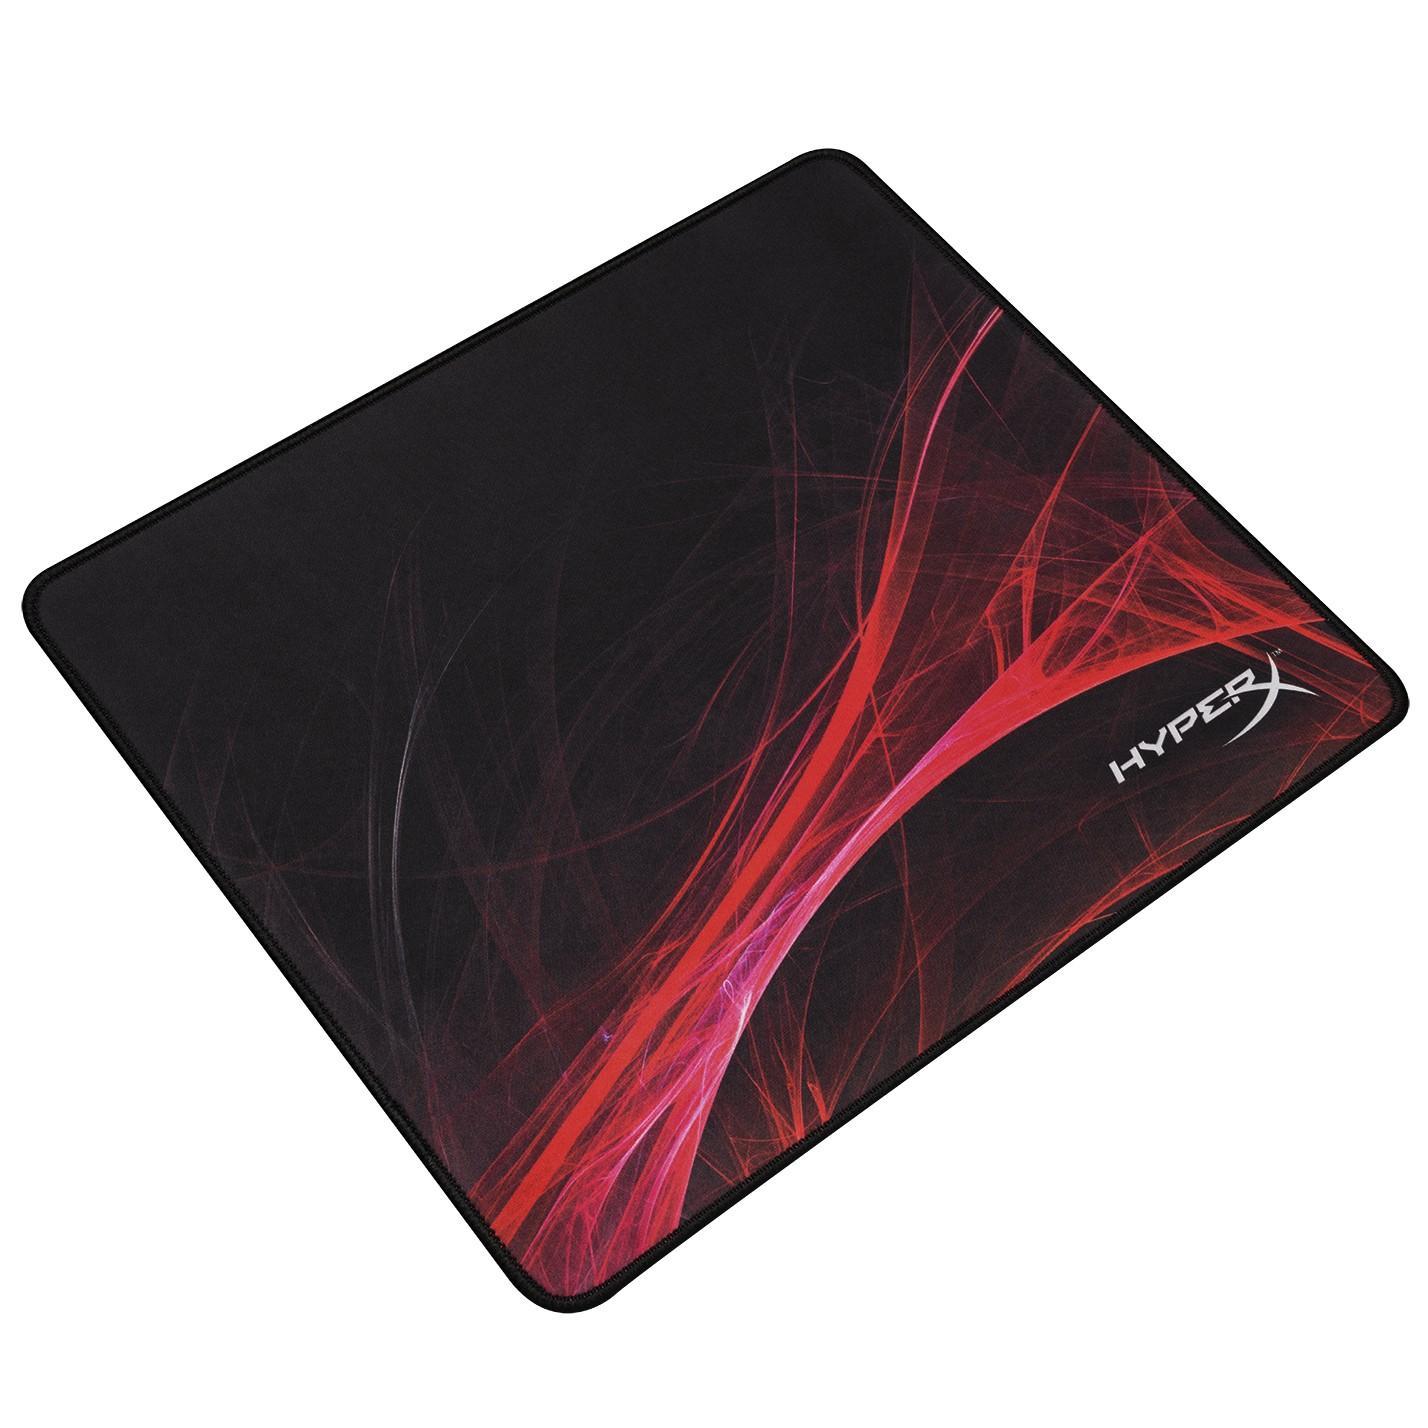 PAD MOUSE HYPERX FURY S PRO SPEED EDITION M